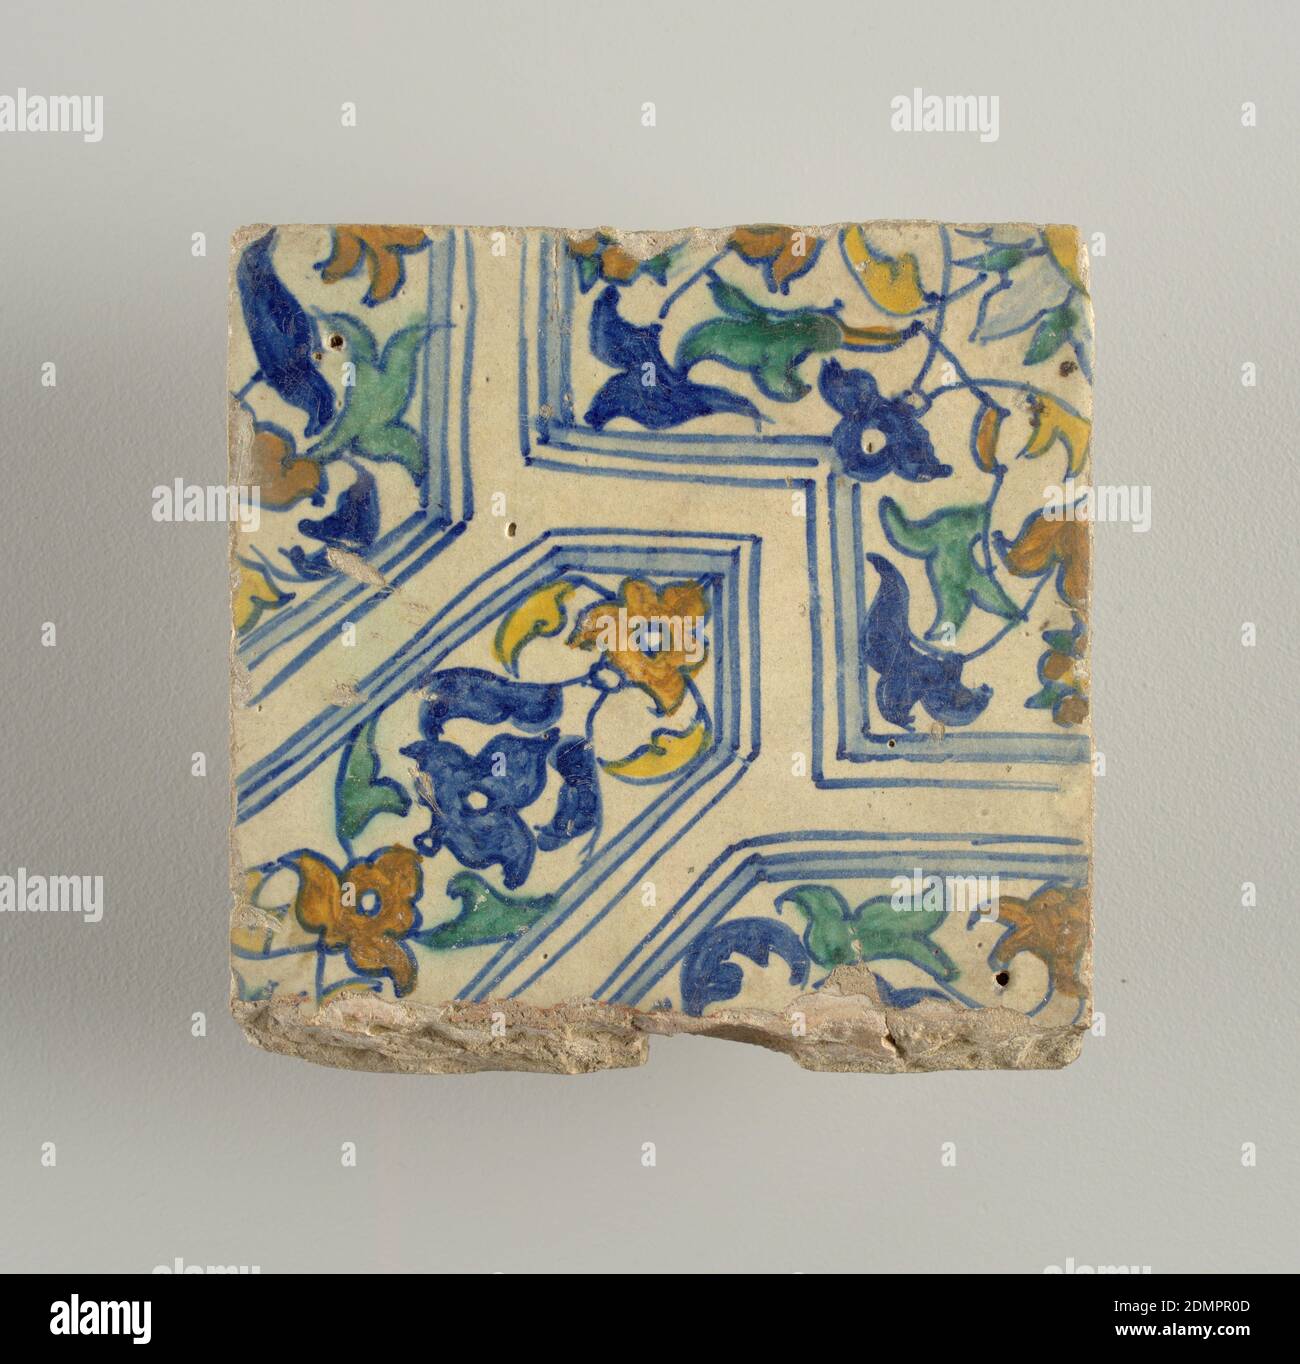 Tile, Glazed earthenware, Portion of a design composed of geometrical shapes enclosing conventionalized flowers and foliage; painted in blue, green, yellow and brown., Netherlands, late 16th century, tiles, Decorative Arts, Tile Stock Photo